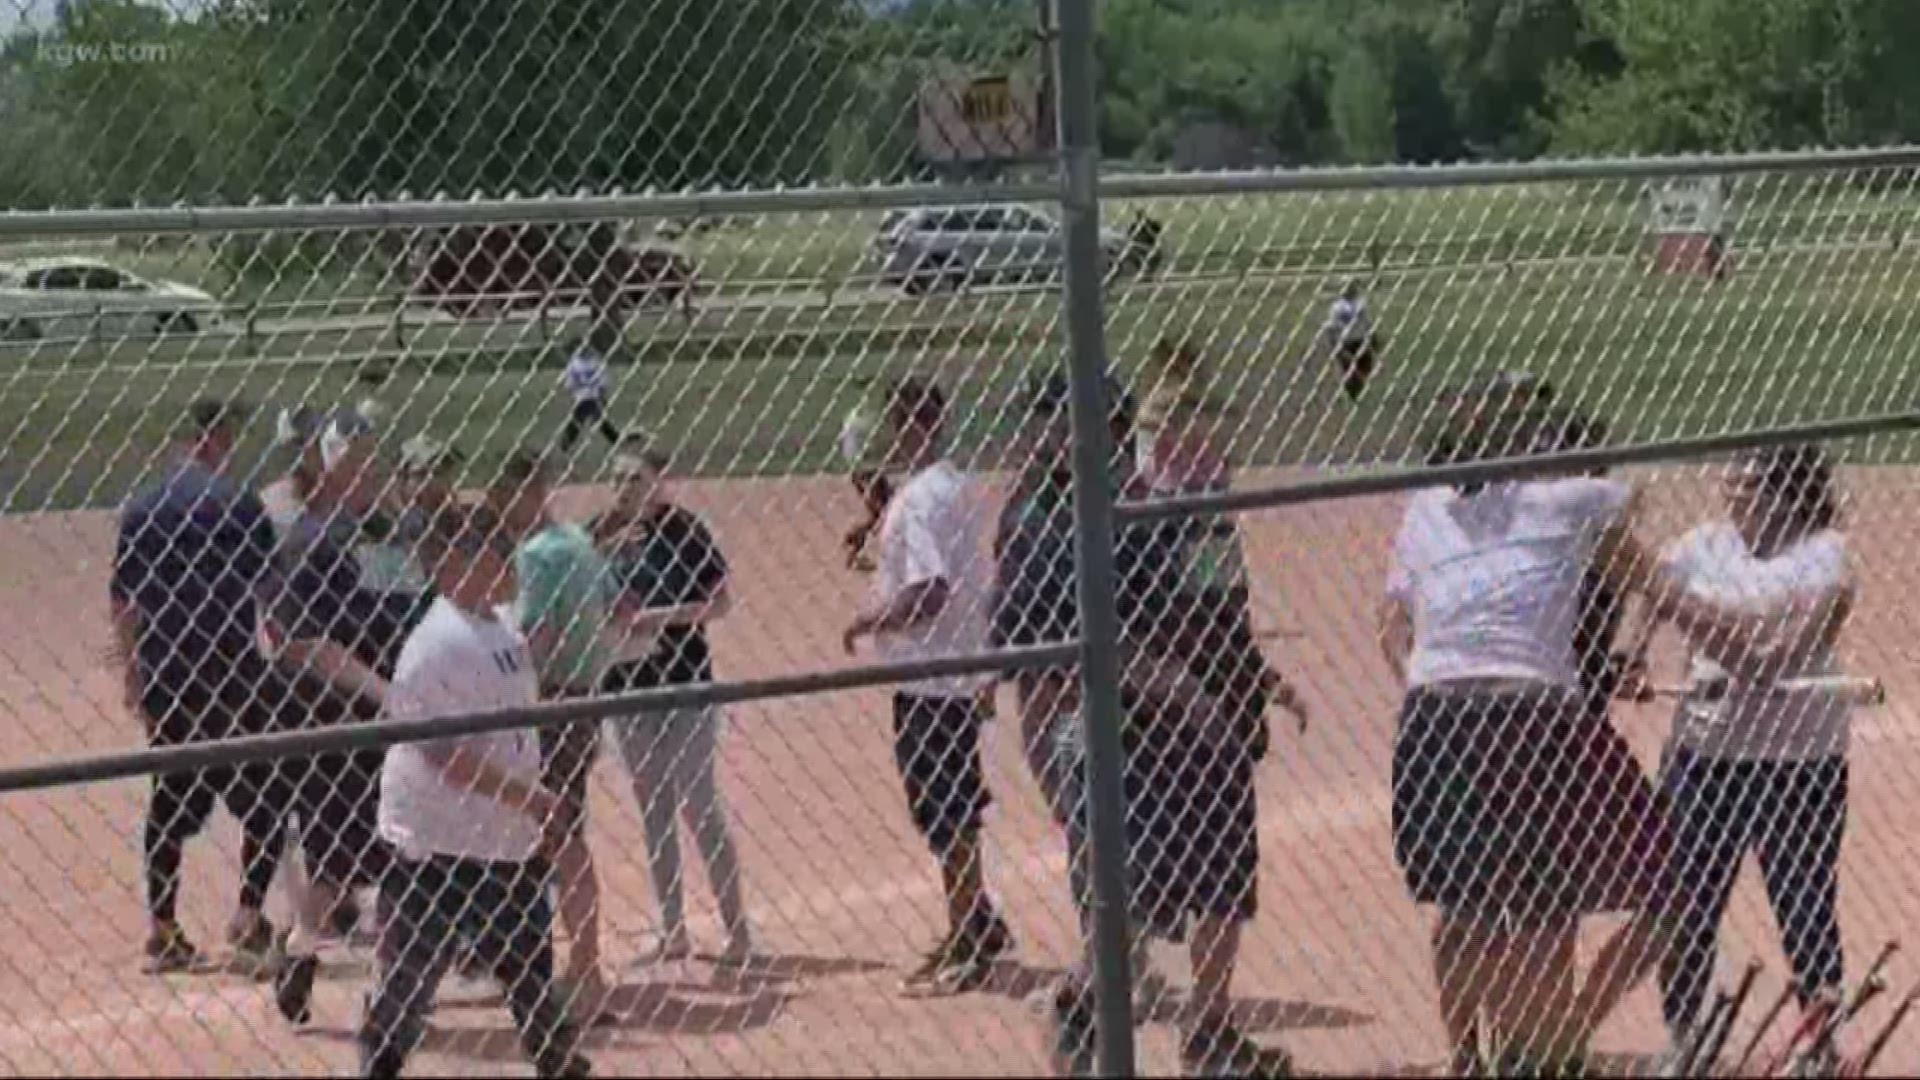 The video has local Little League parents and players hoping it reminds everyone why sportsmanship is such a big deal.